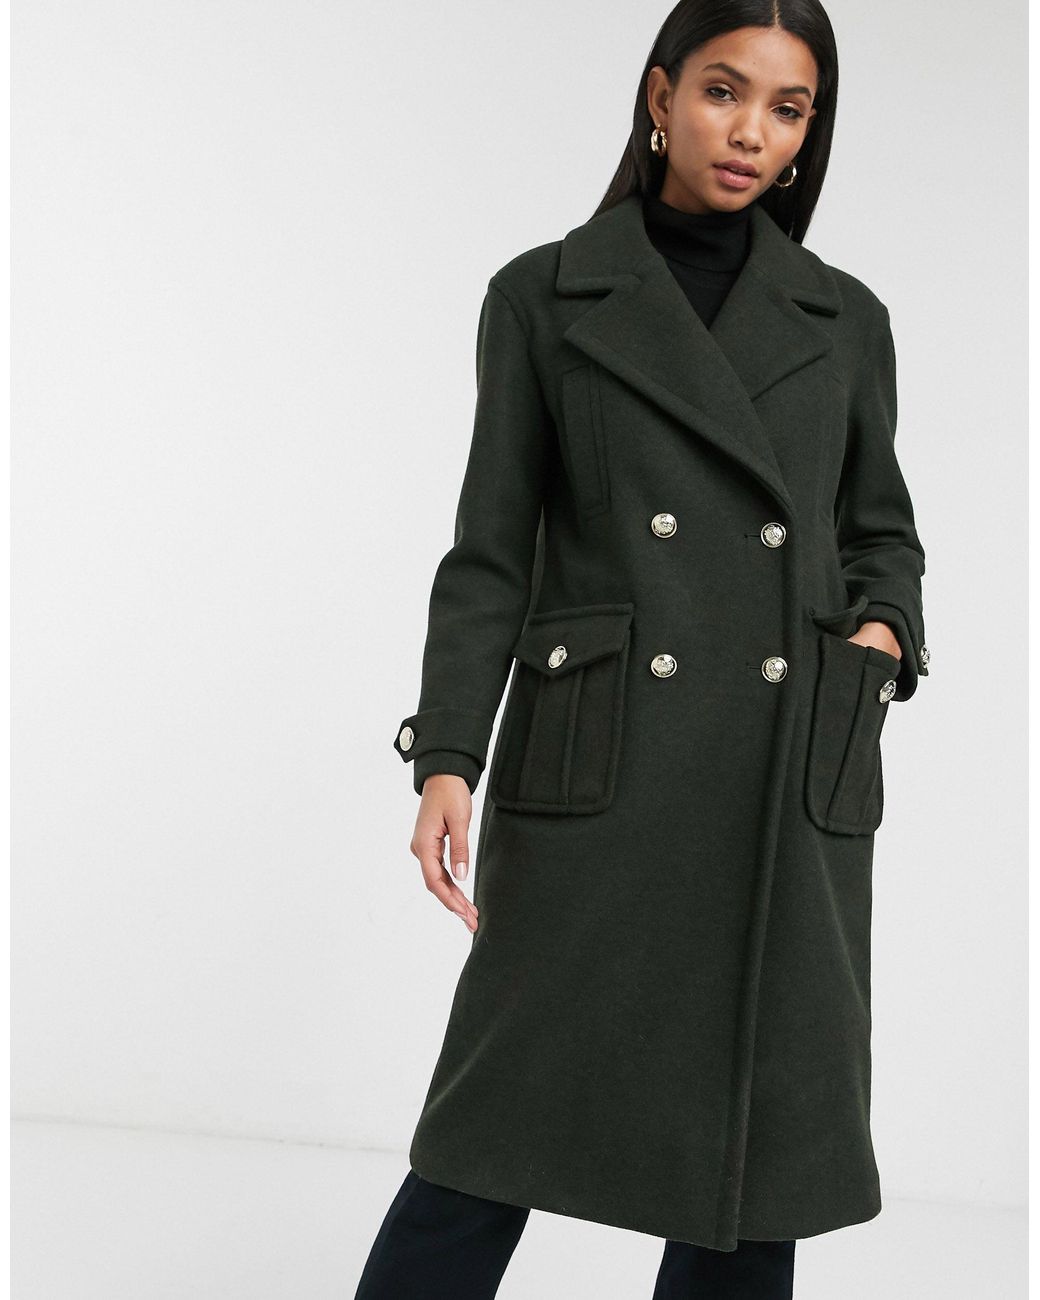 River Island Synthetic Double Breasted Military Style Coat in Green ...